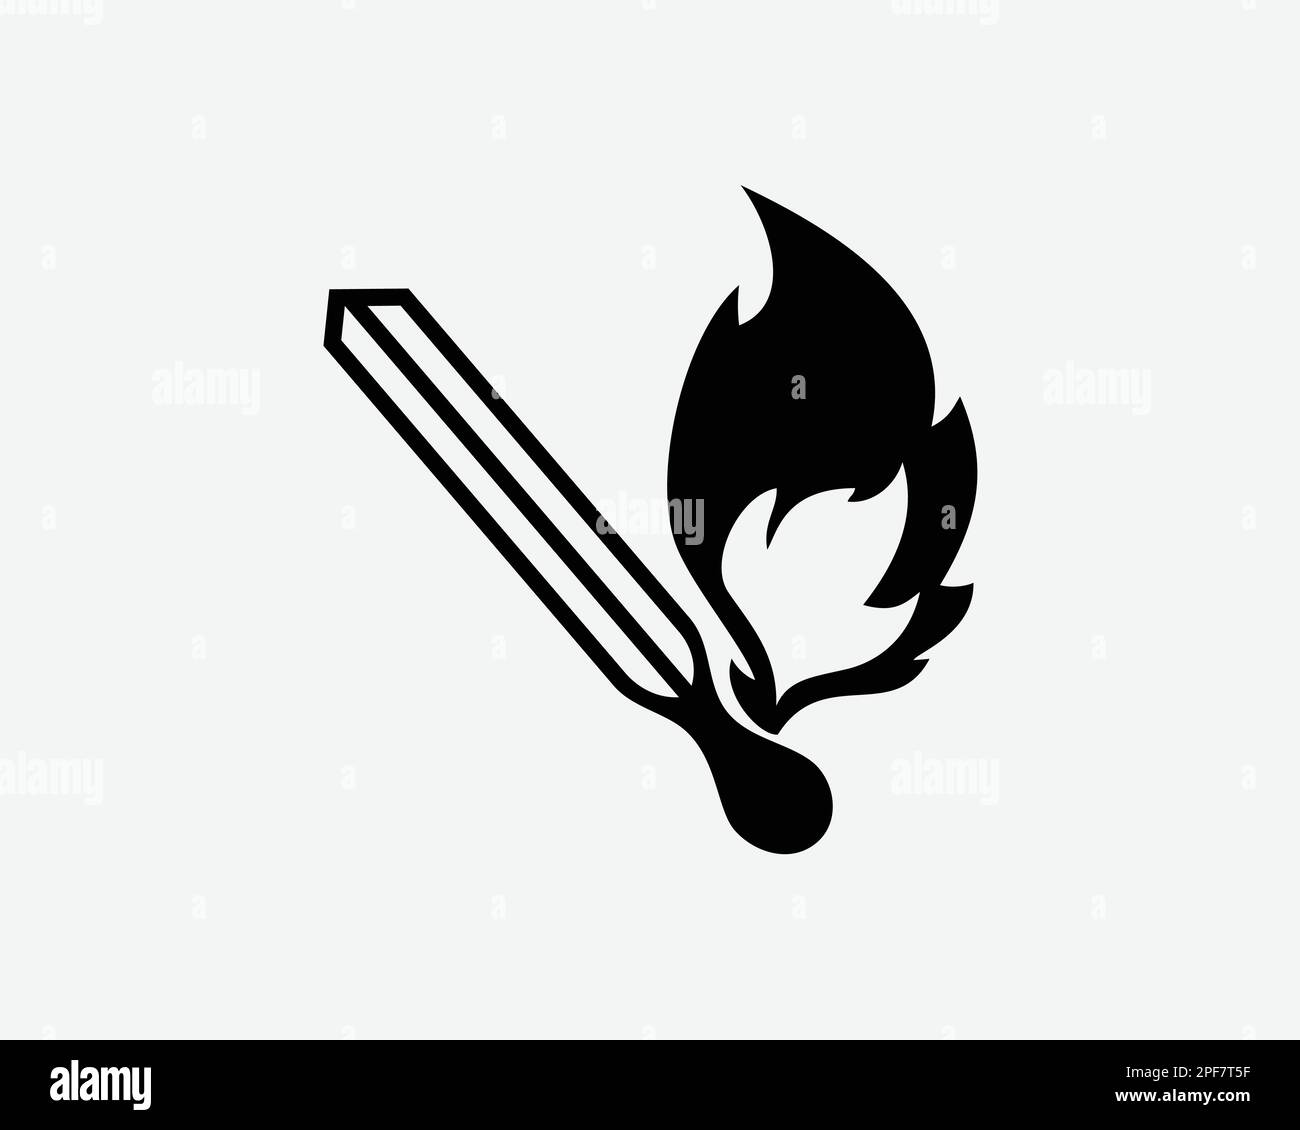 Burning Matchstick Light Match Stick Fire Flame Burn Black White Silhouette Symbol Icon Sign Graphic Clipart Artwork Illustration Pictogram Vector Stock Vector